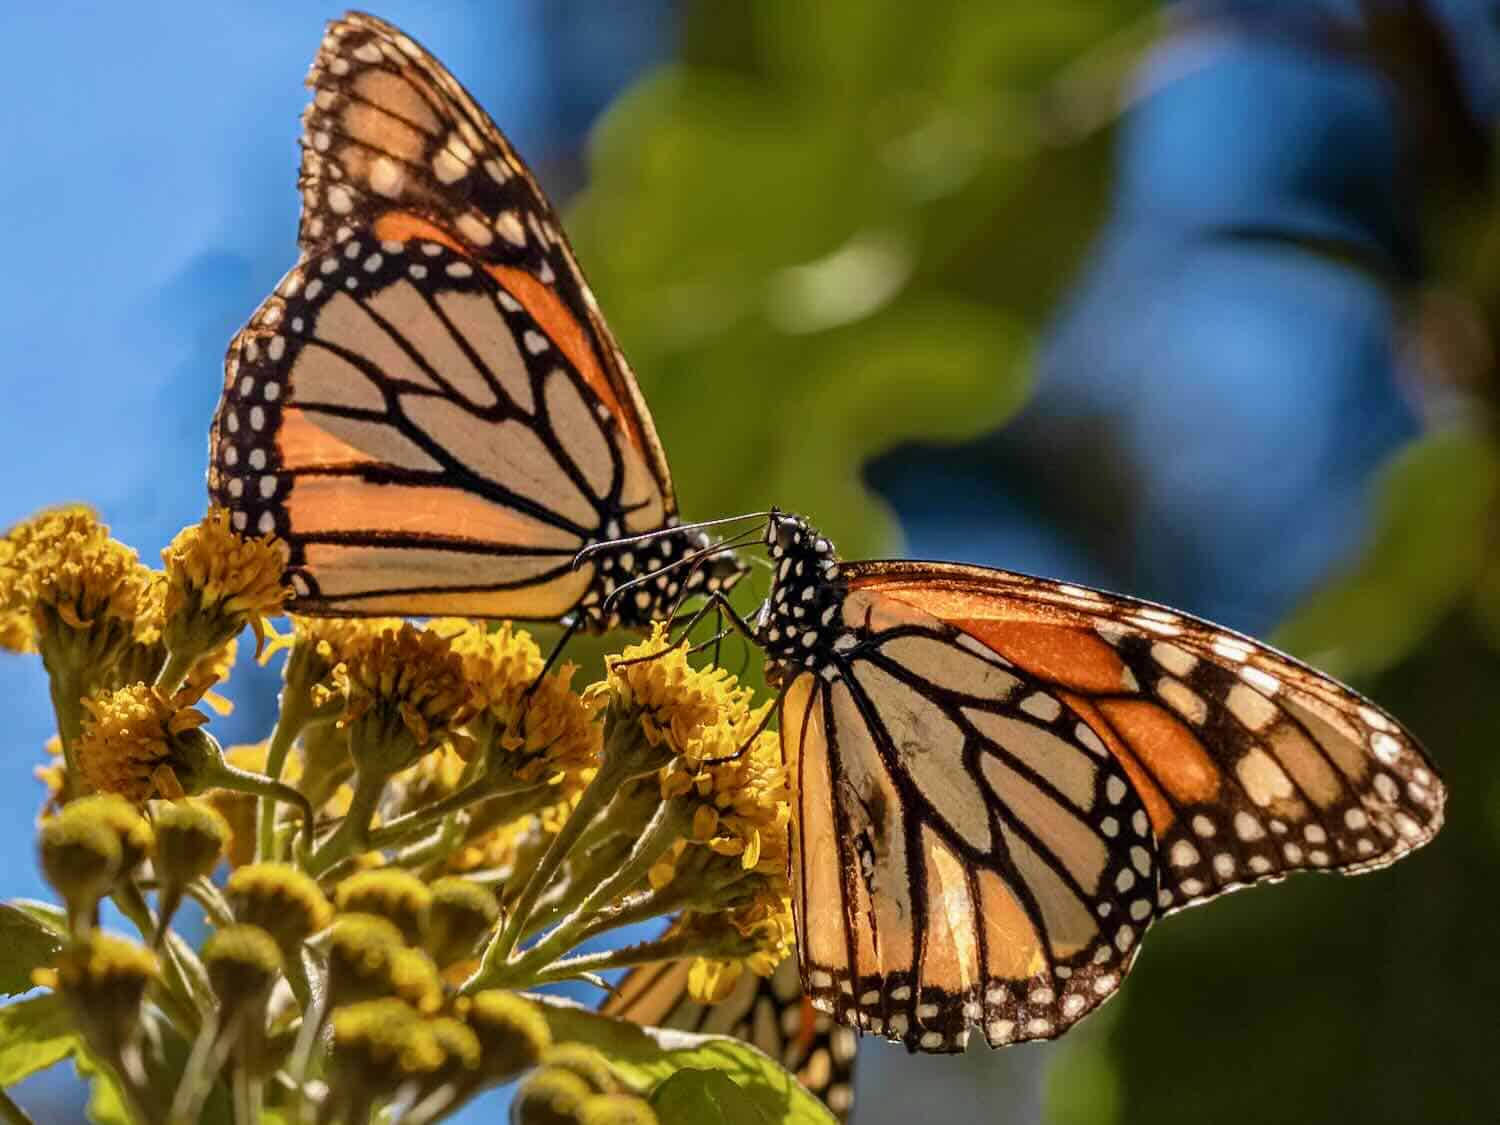 How to Travel to See Monarch Butterflies in Mexico